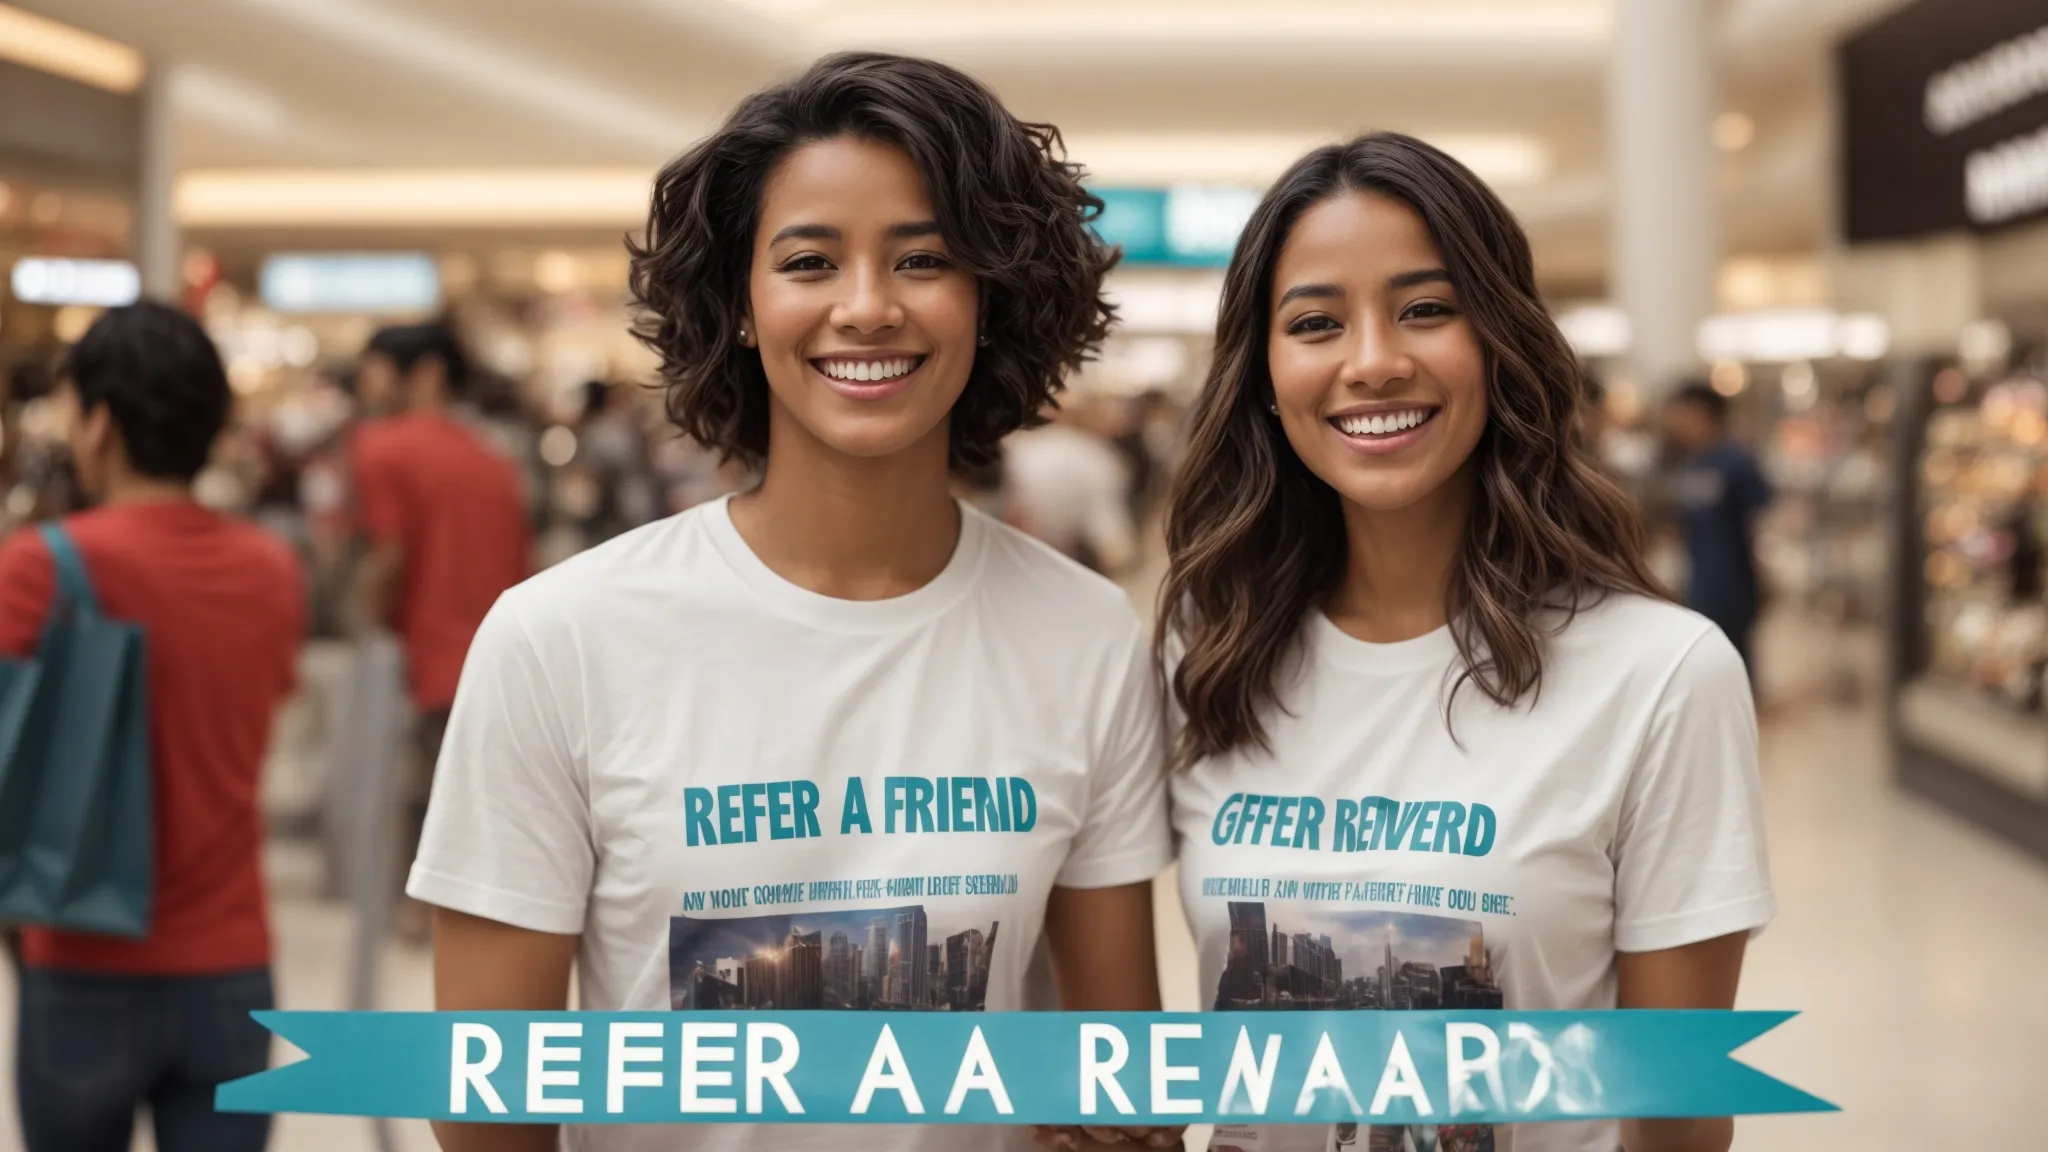 two smiling individuals wearing branded t-shirts, holding up a sign that reads "refer a friend, earn rewards!" in a bustling shopping mall.